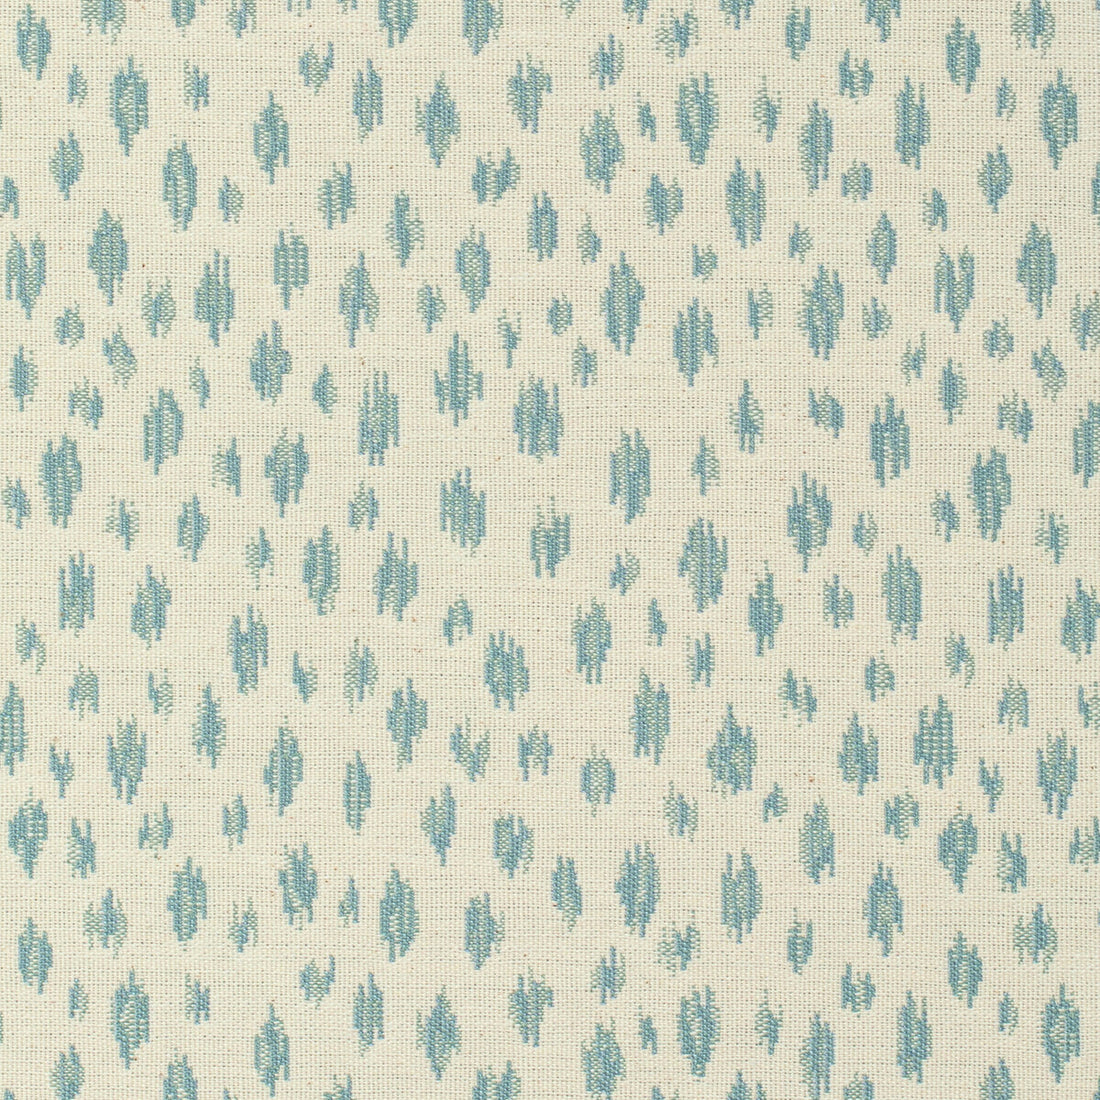 Honfleur Woven fabric in aqua color - pattern 8020112.113.0 - by Brunschwig &amp; Fils in the Granville Weaves collection